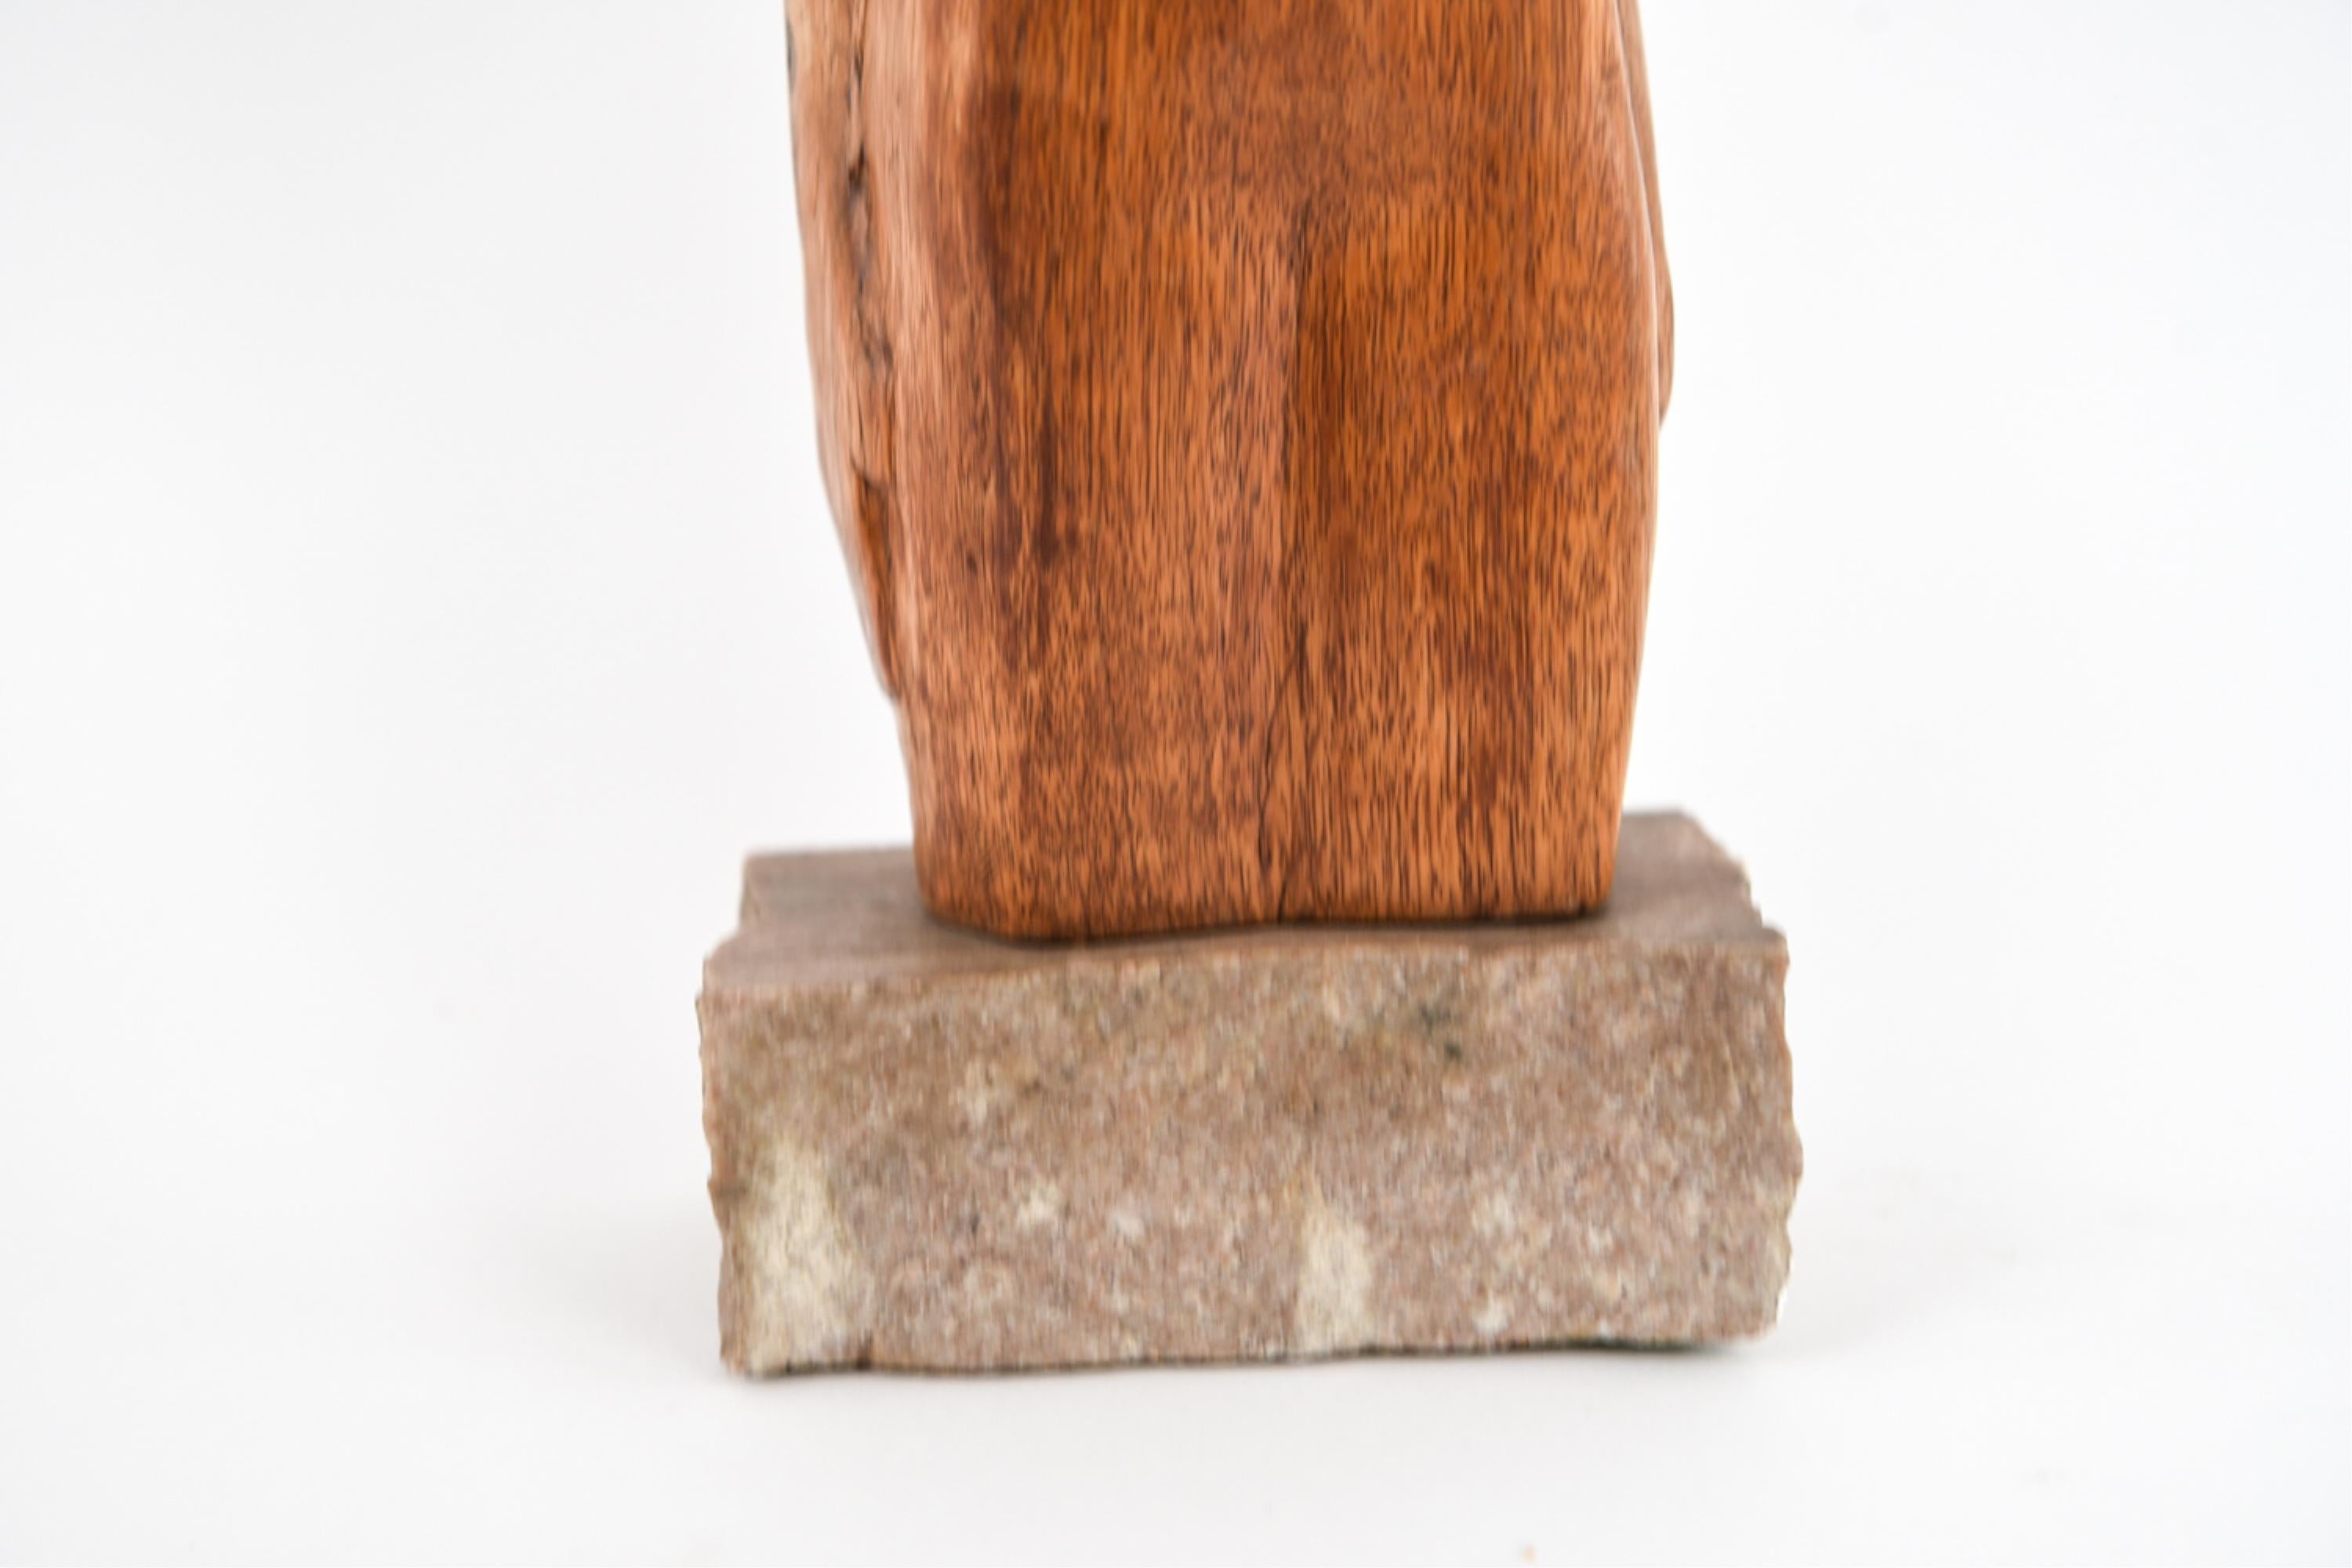 American Carved Wood Figurative Sculpture Attributed to Elaine Kaufman Feiner circa 1960s